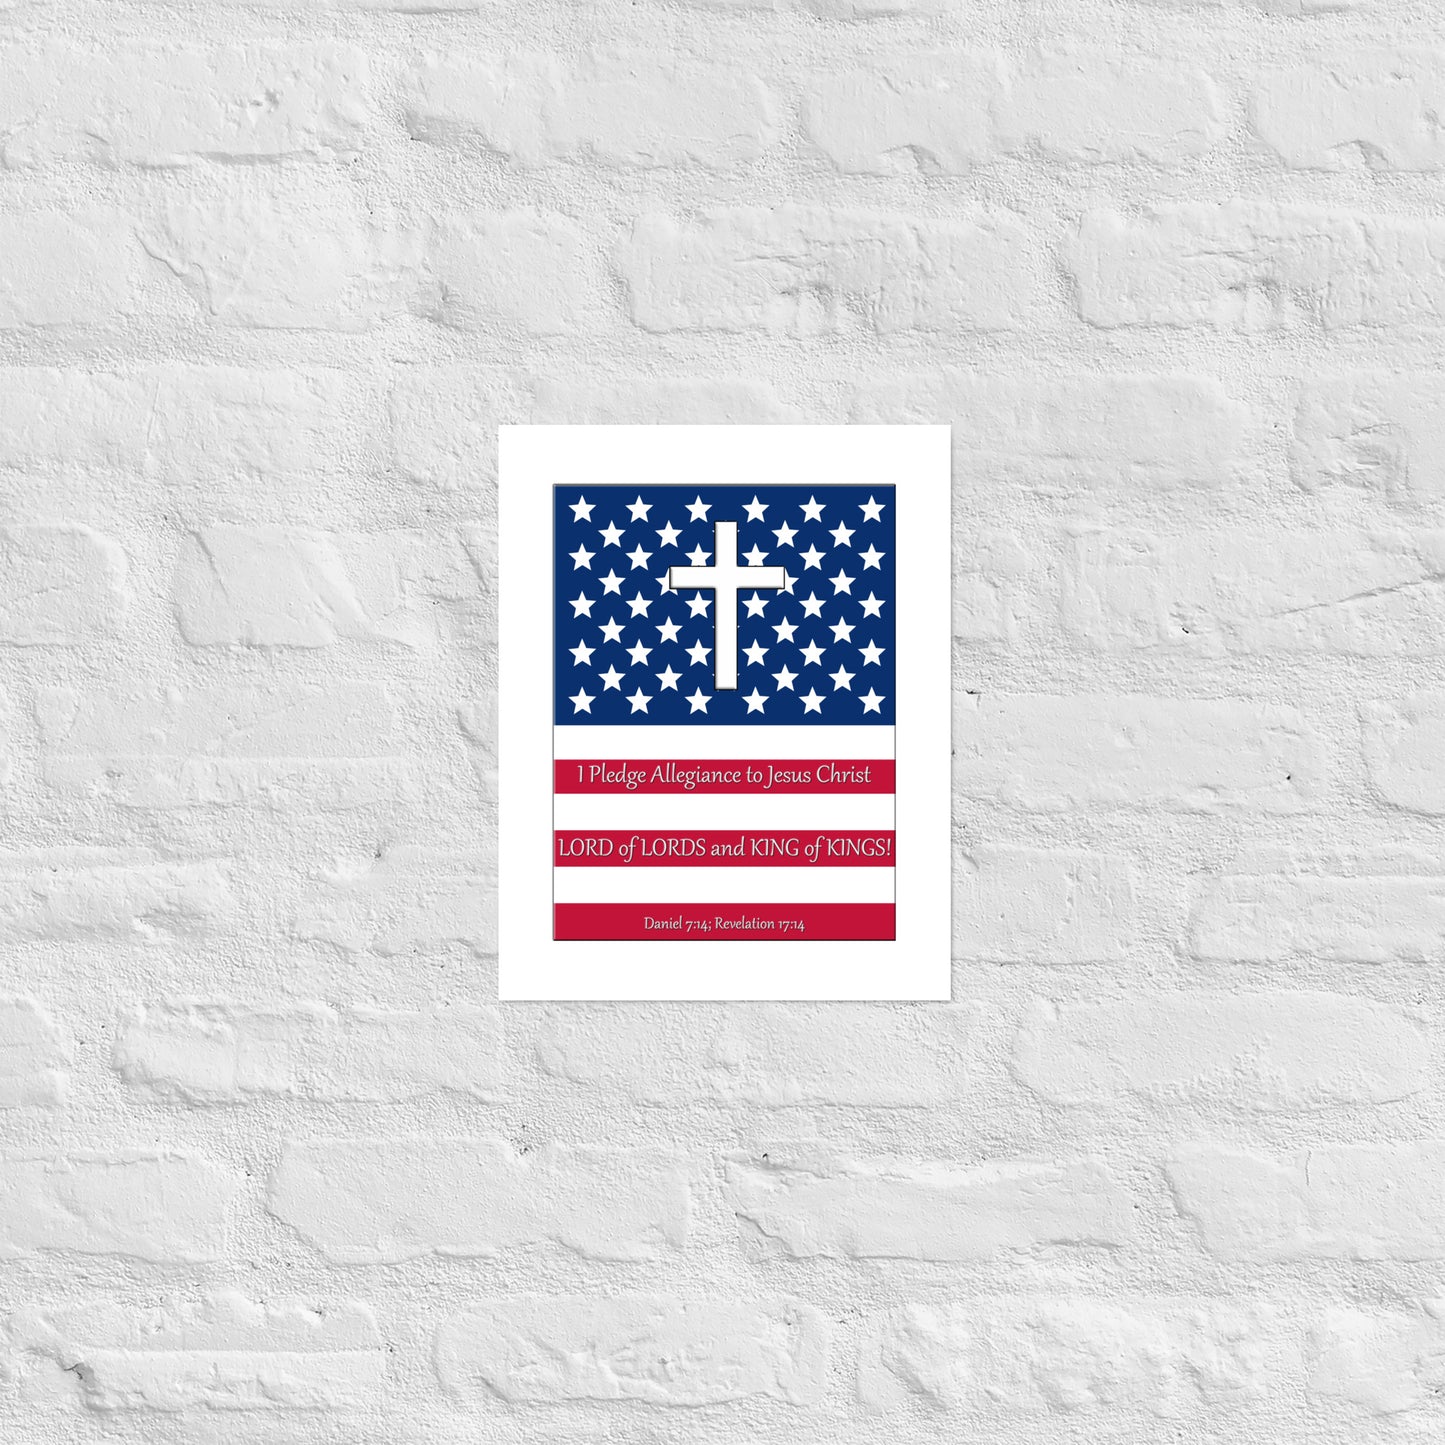 A019 Art Print - Museum Quality Giclée Print Featuring the Stars and Stripes, a Cross, and the Text “I Pledge Allegiance to Jesus Christ LORD of LORDS and KING of KINGS!”